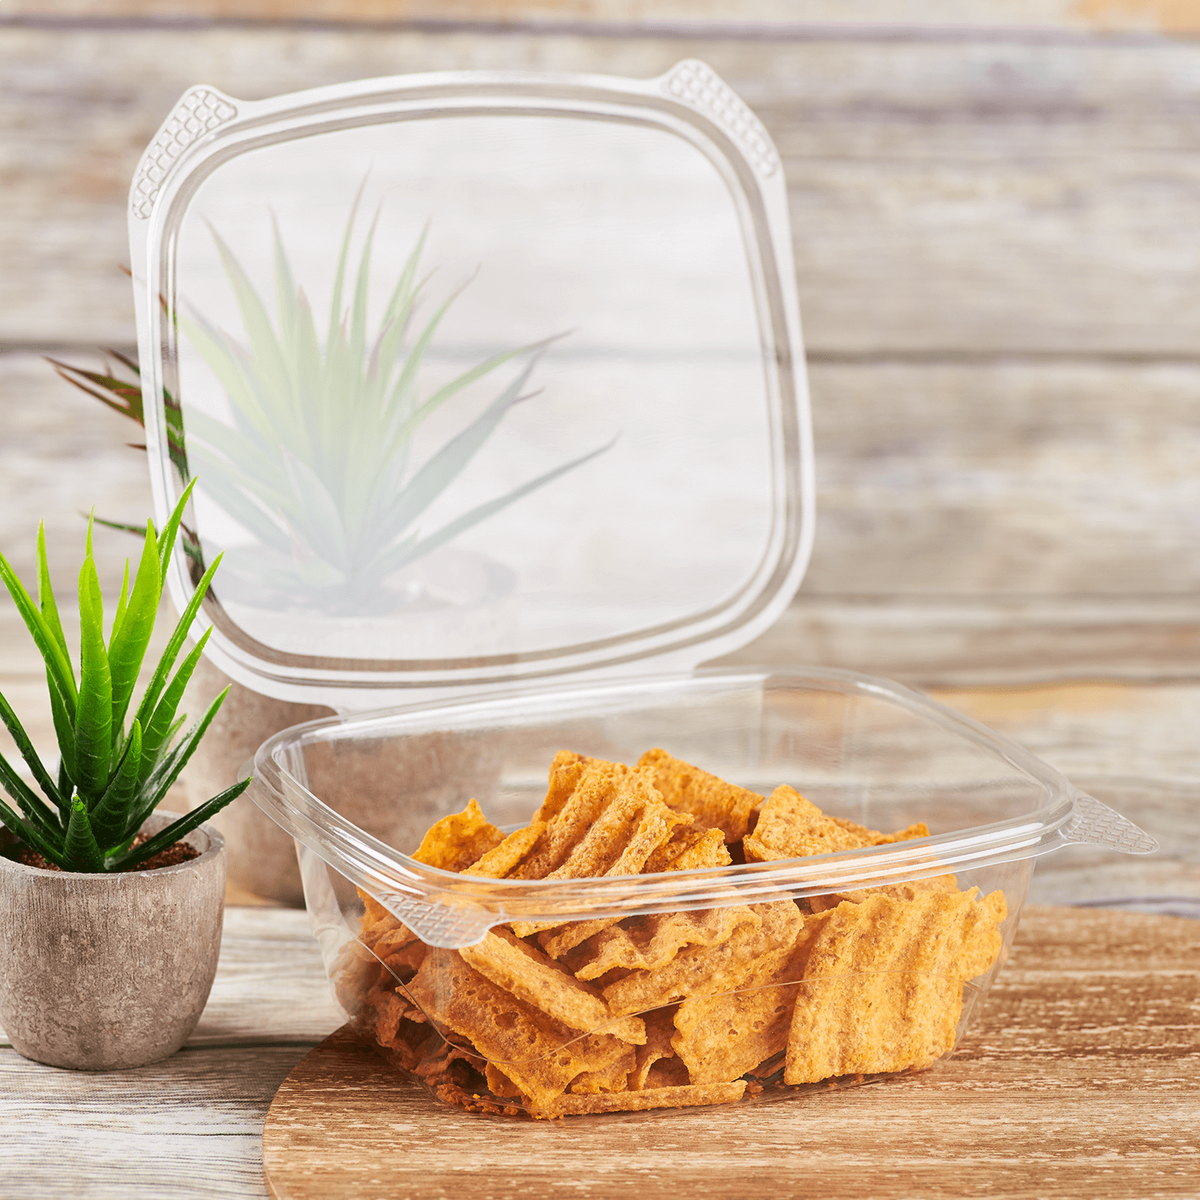 https://www.restaurantsupplydrops.shop/wp-content/uploads/1689/33/check-out-our-exciting-range-of-compostable-32-oz-hinged-deli-containers-eco-friendly-oversized-hinged-deli-boxes-200-count-karat-unique-designs-you-wont-find-anywhere-else_3.png